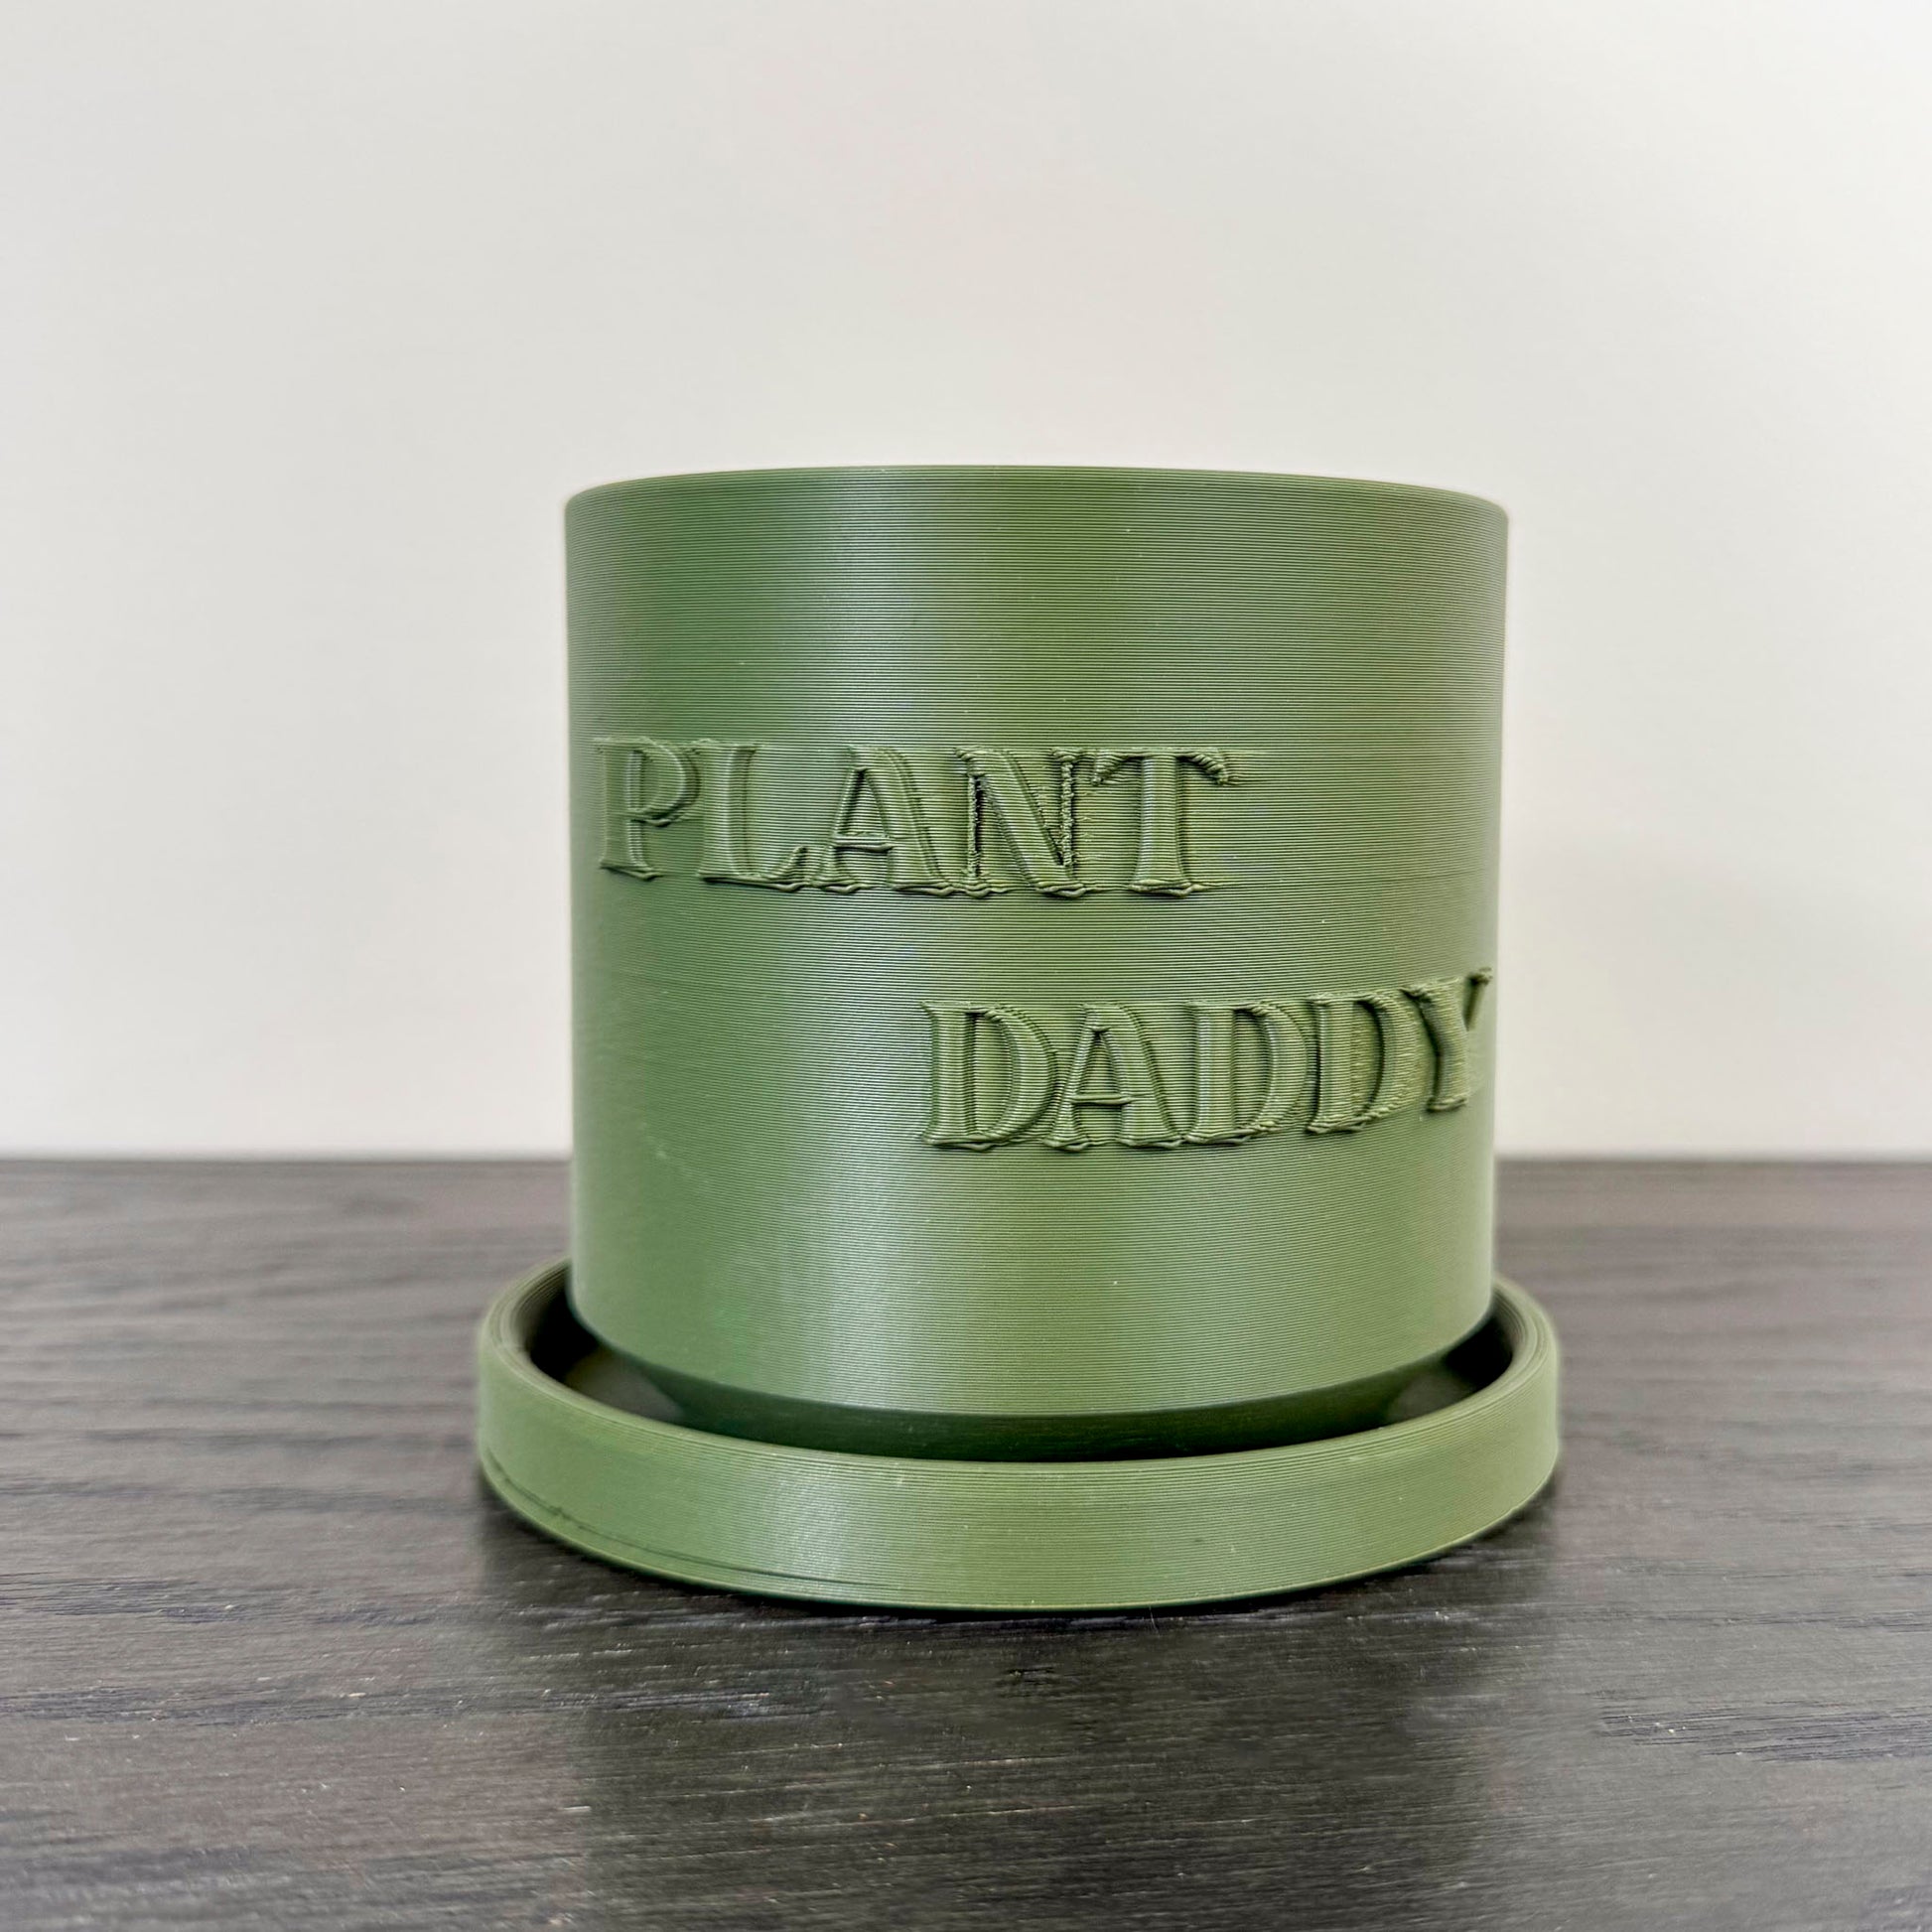 Green 3D printed plant daddy planter